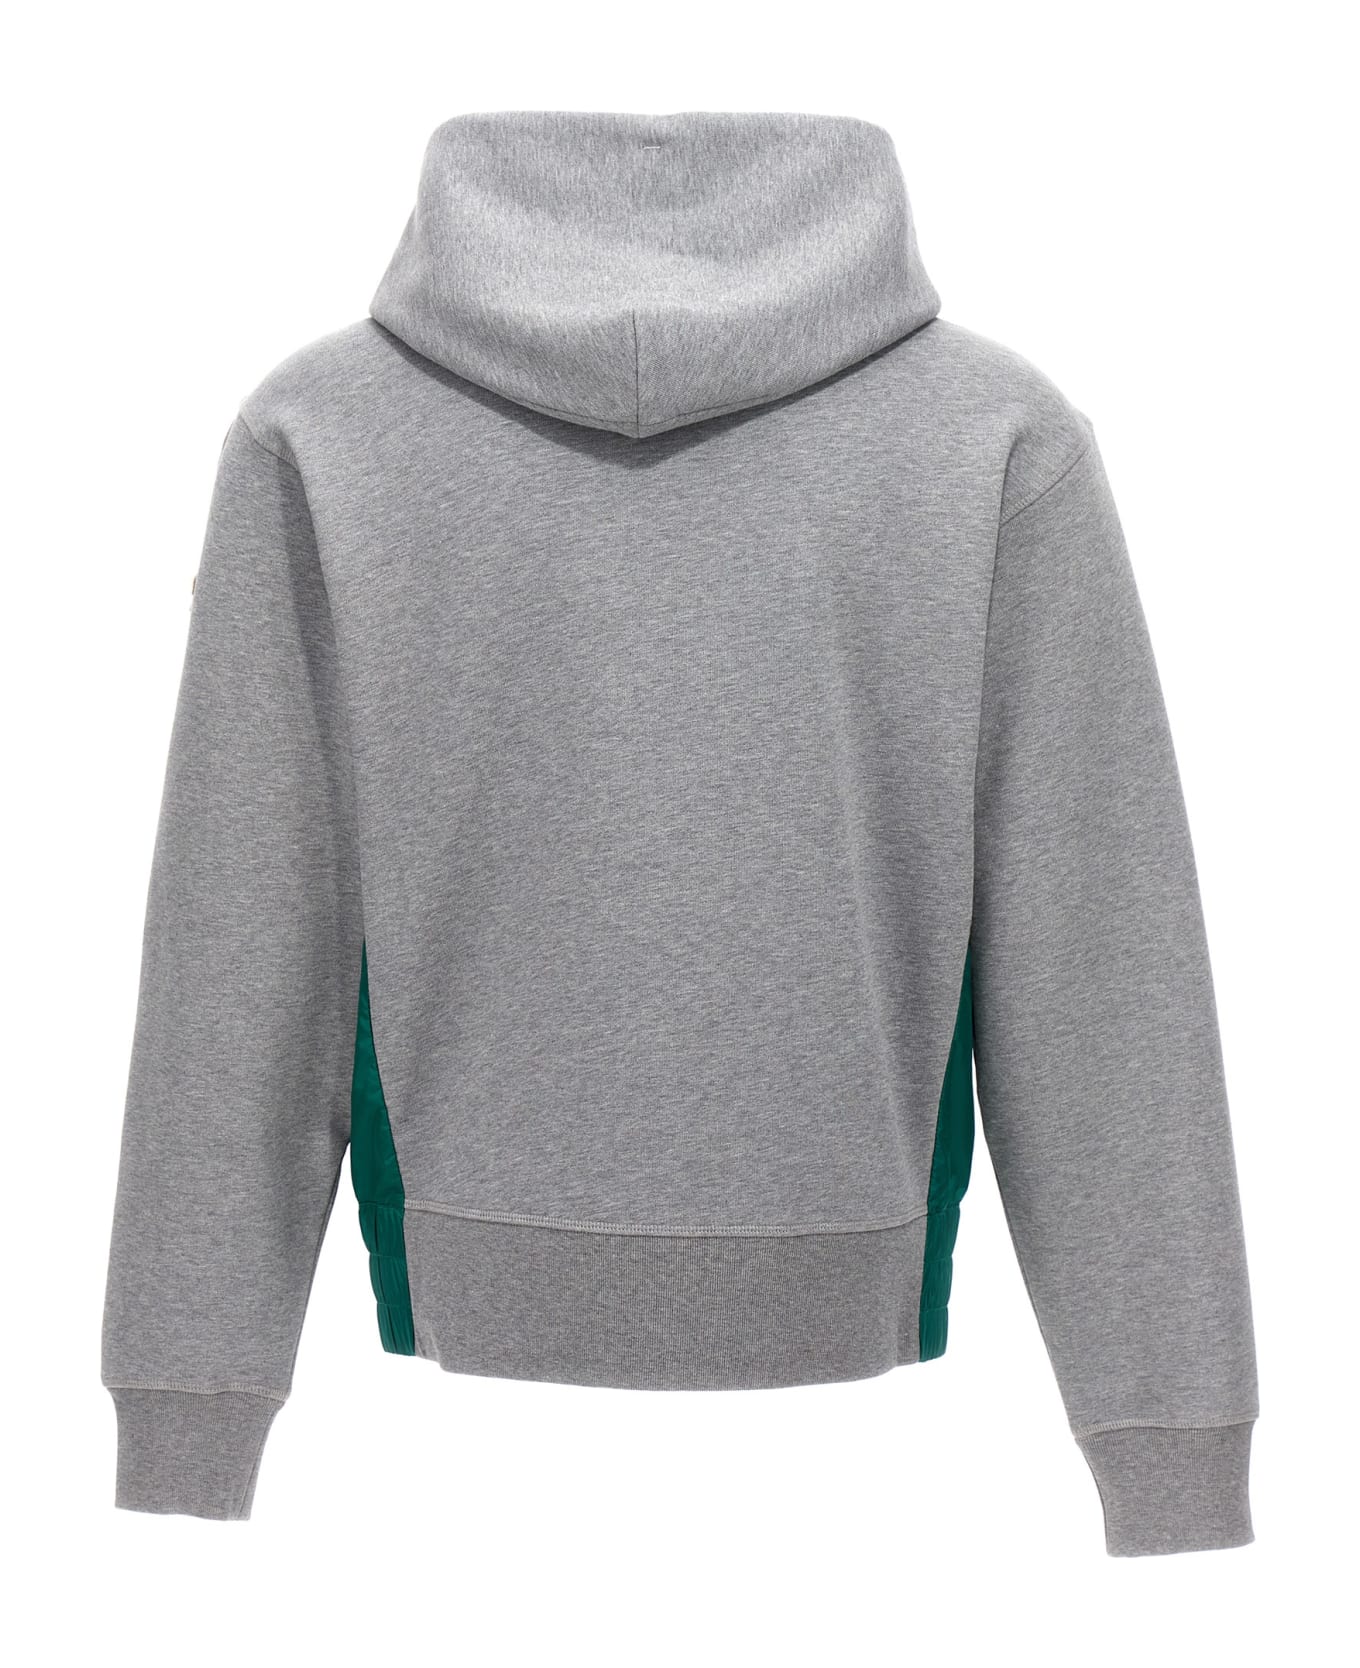 Moncler Grenoble Logo Embroidery Hoodie - Gray